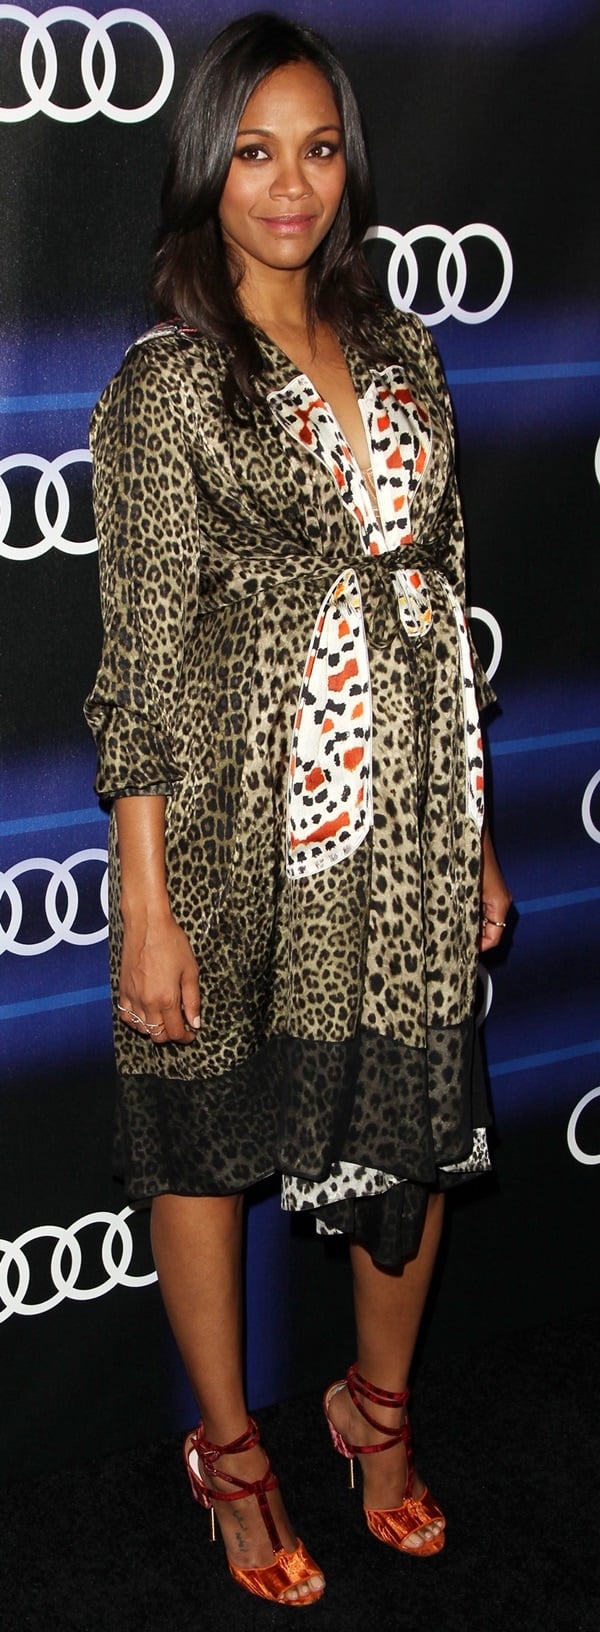 Zoe Saldana accessorized a silk leopard-print dress with a pair of Givenchy's standout "Marzia" sandals